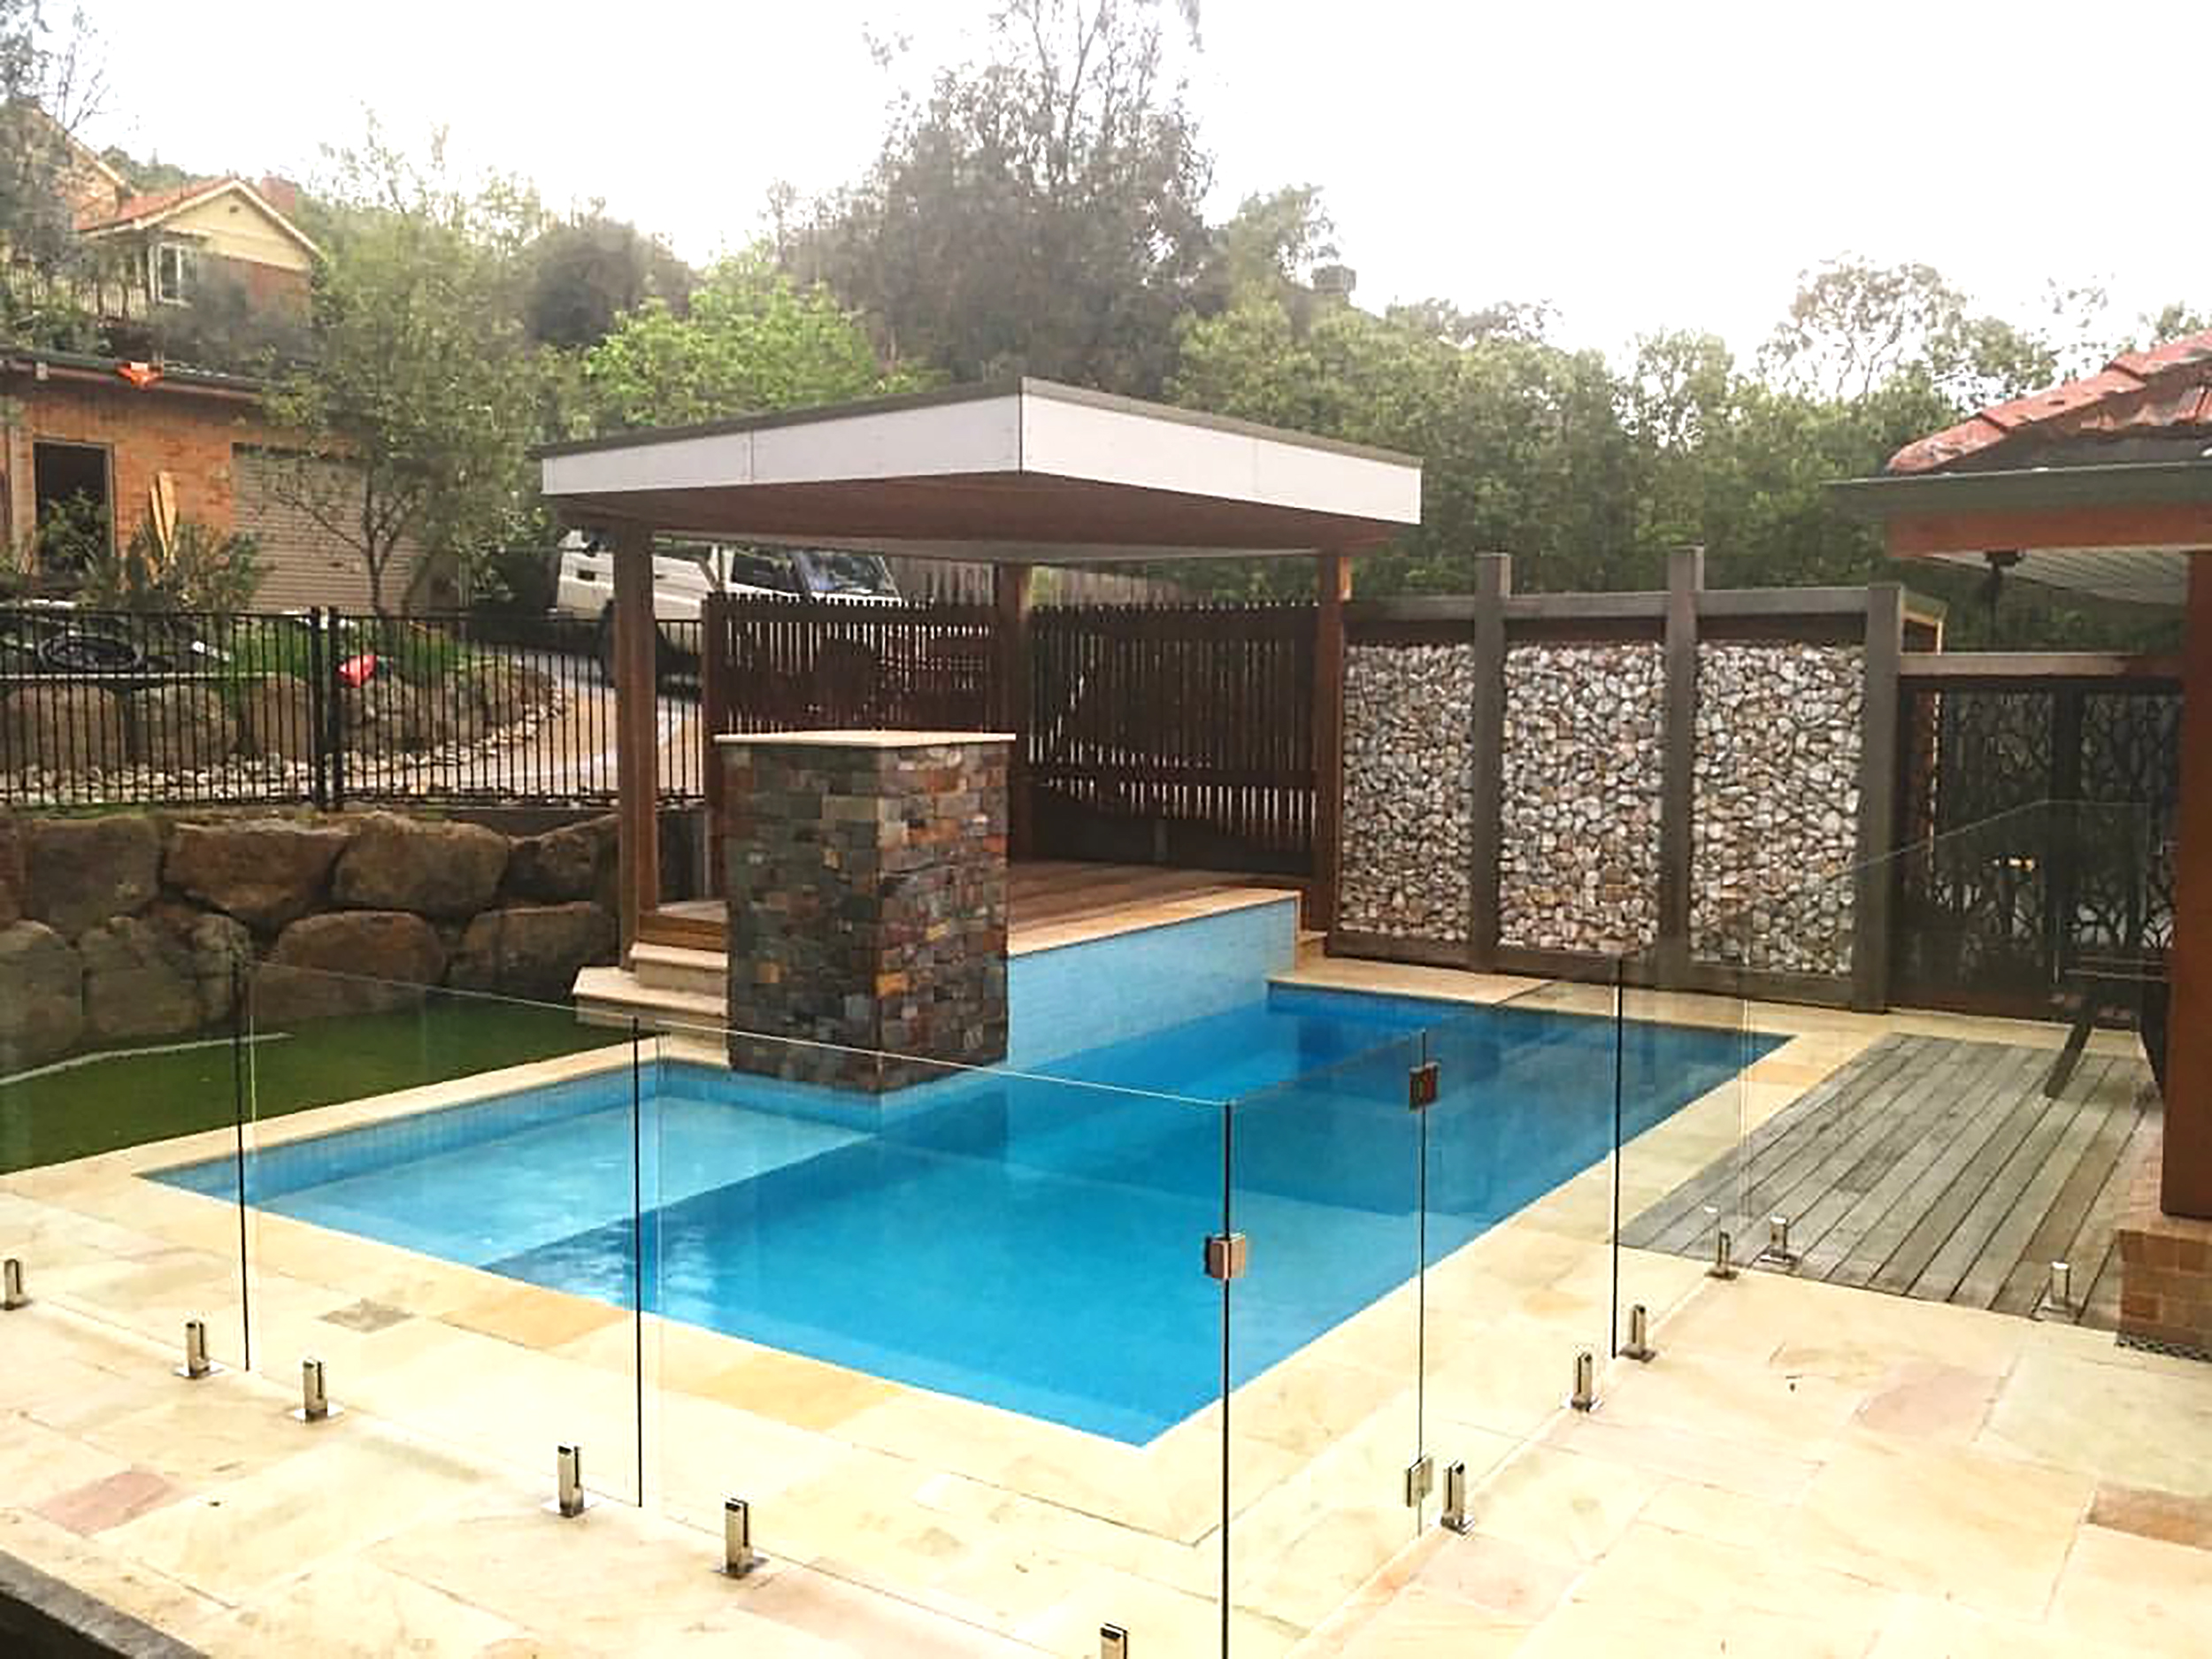  Rustic Outback Pillar and Kimberley Beige Sandstone around Pool Area 